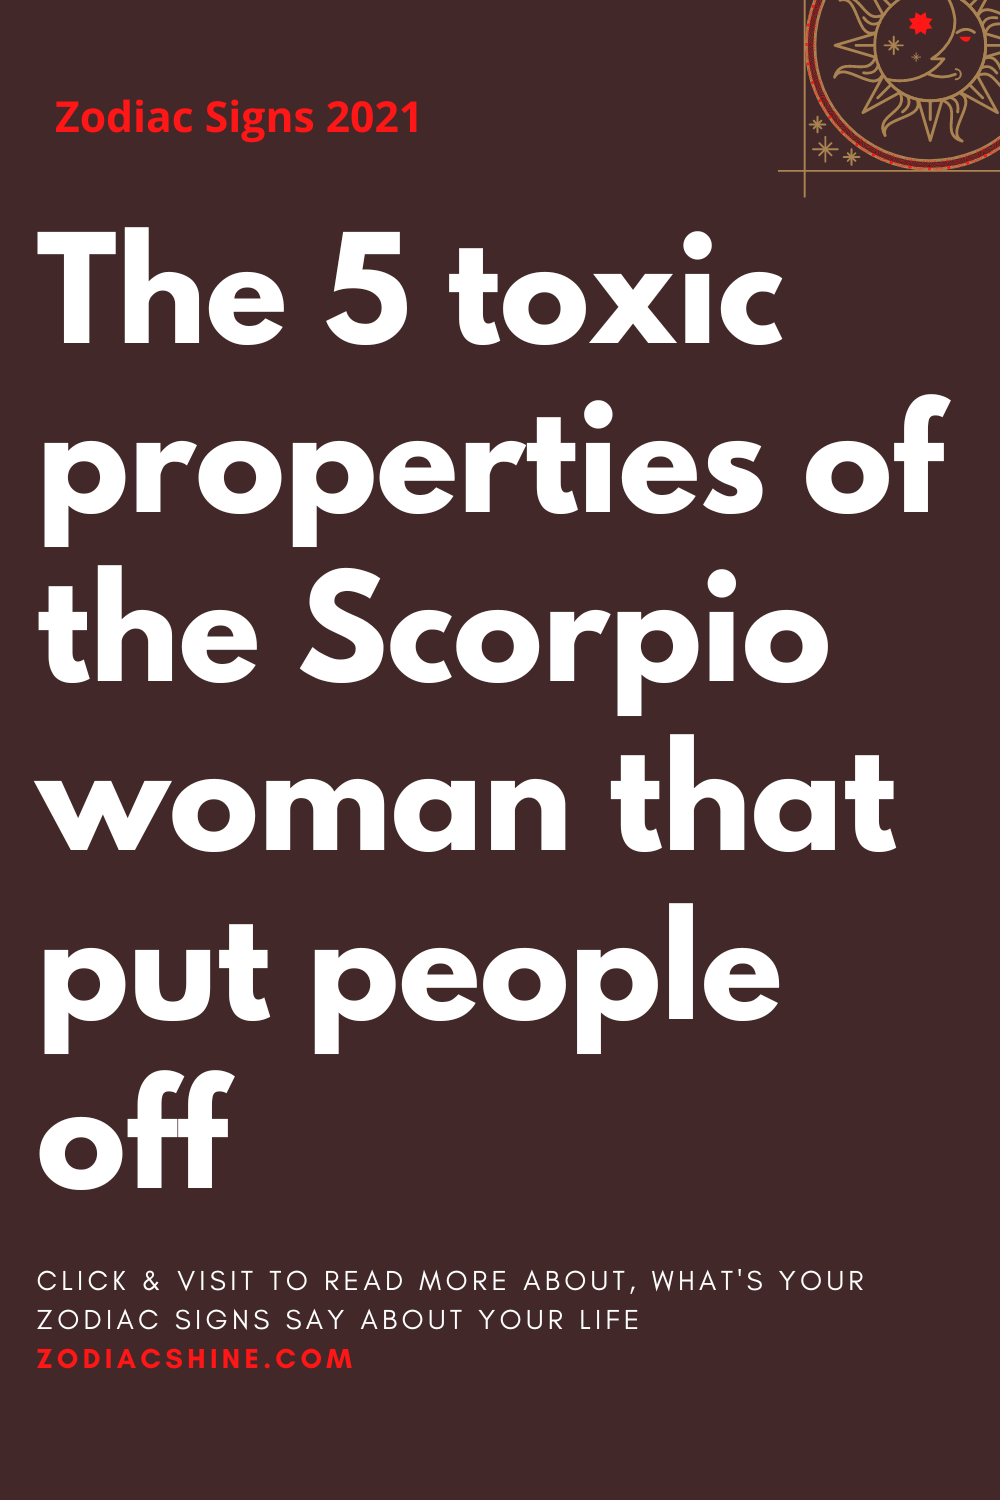 The 5 toxic properties of the Scorpio woman that put people off